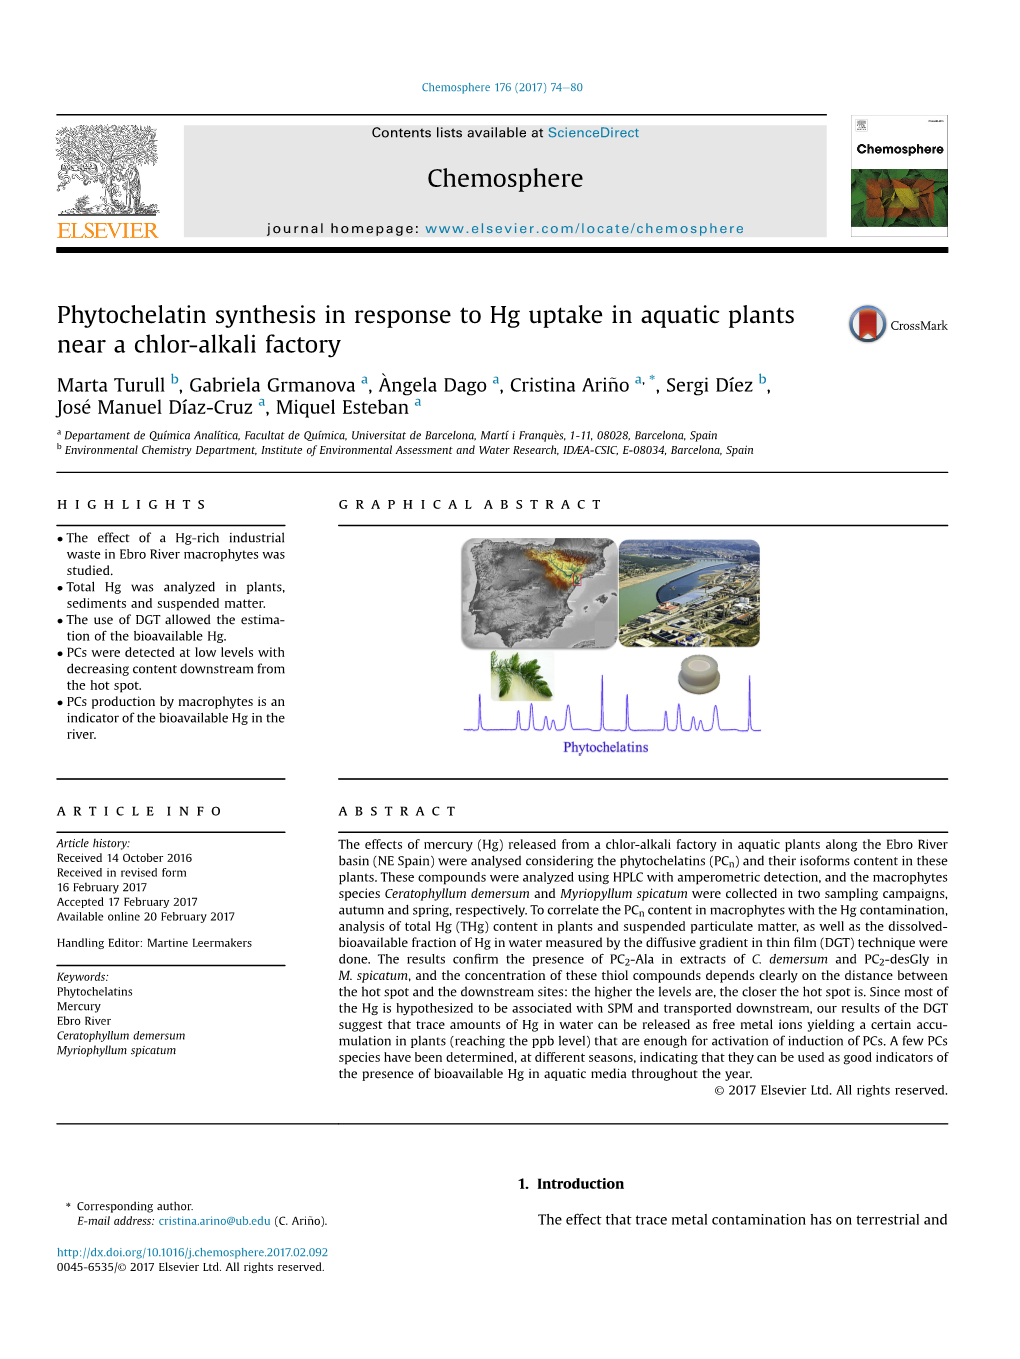 Phytochelatin Synthesis in Response to Hg Uptake in Aquatic Plants Near A